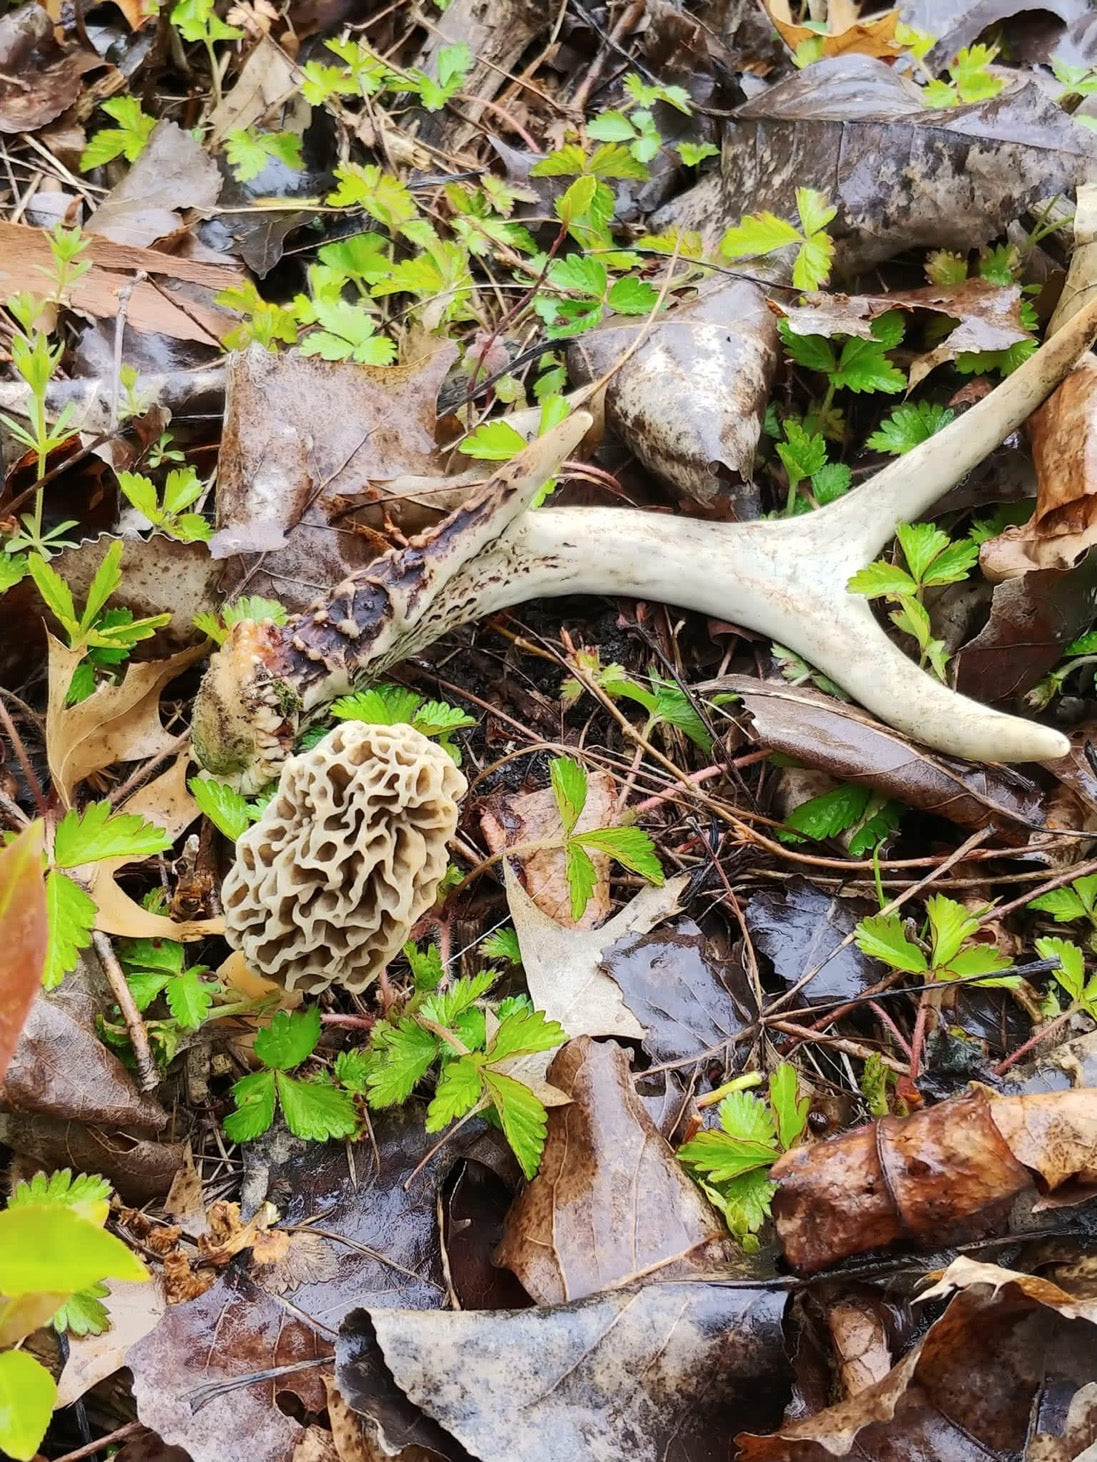 The Ins and Outs of Morels: Episode 1